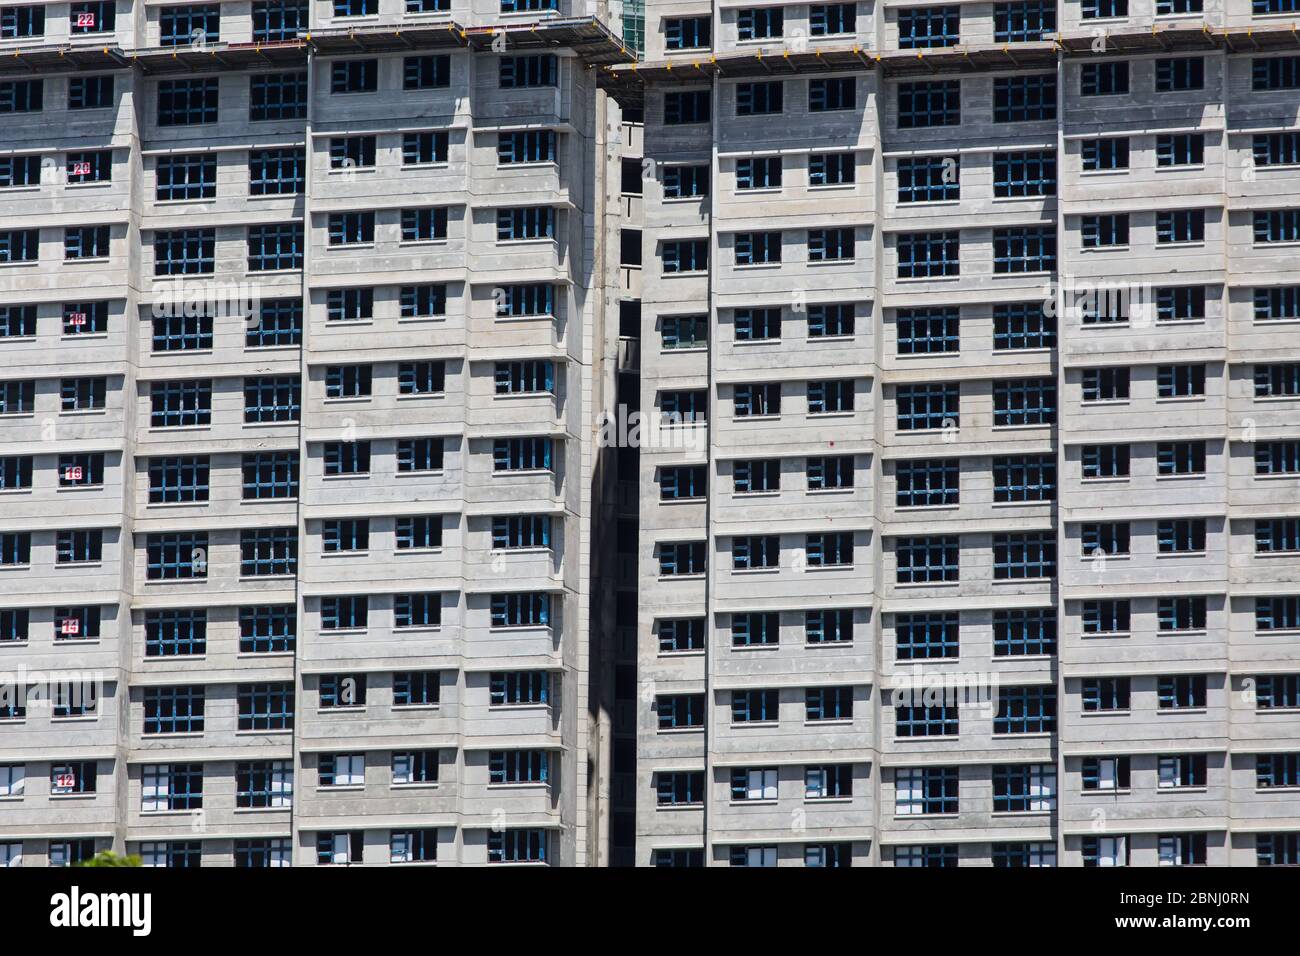 Construction of a high rise houses has stopped work due to the coronavirus pandemic that affected thousands of foreign workers in Singapore. Stock Photo